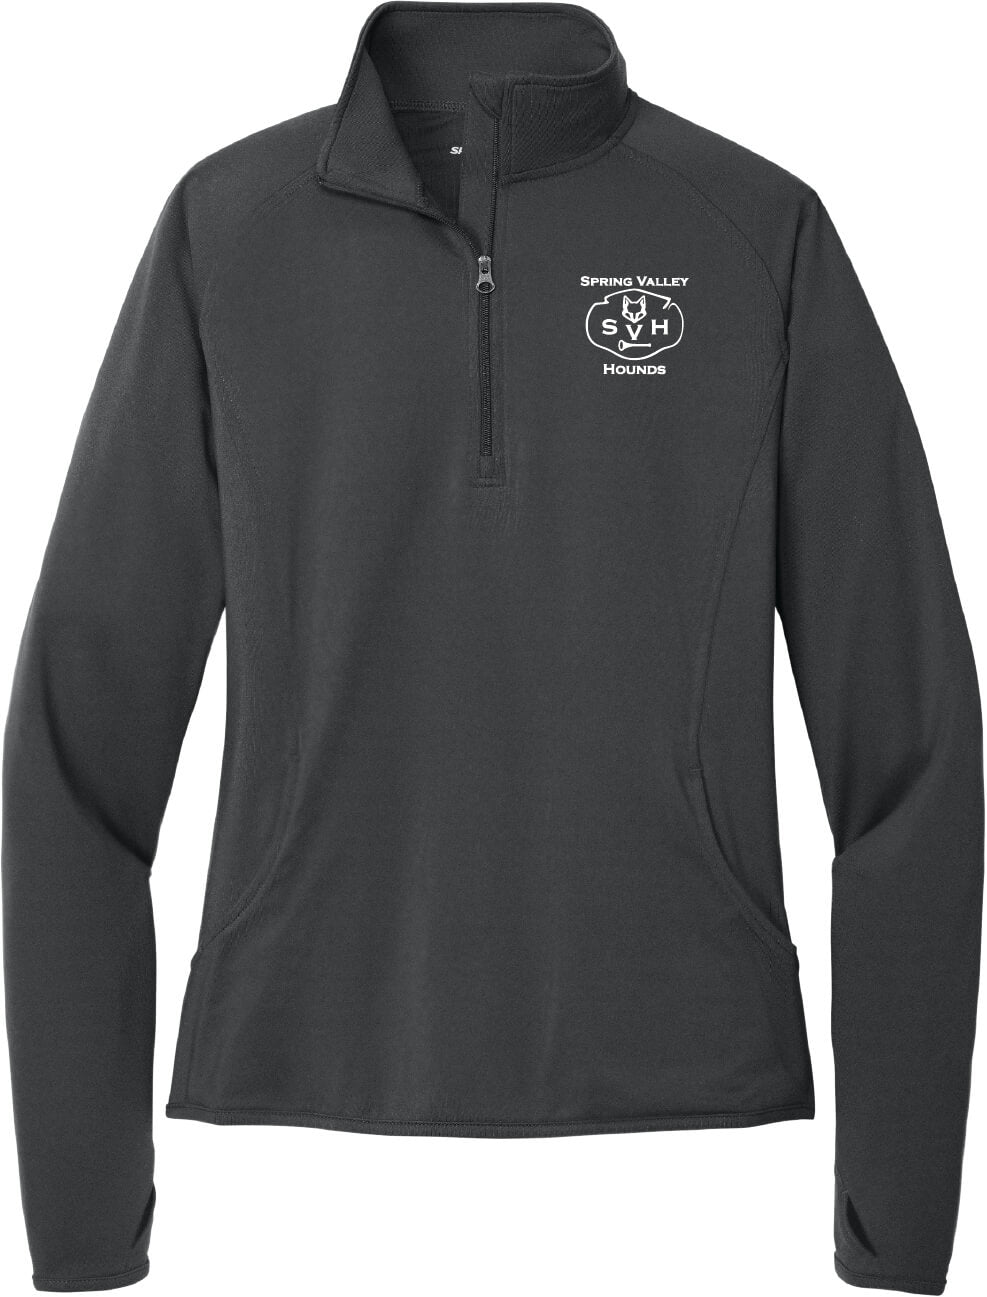 Spring Valley Hounds Zip Pullover (Ladies) gray